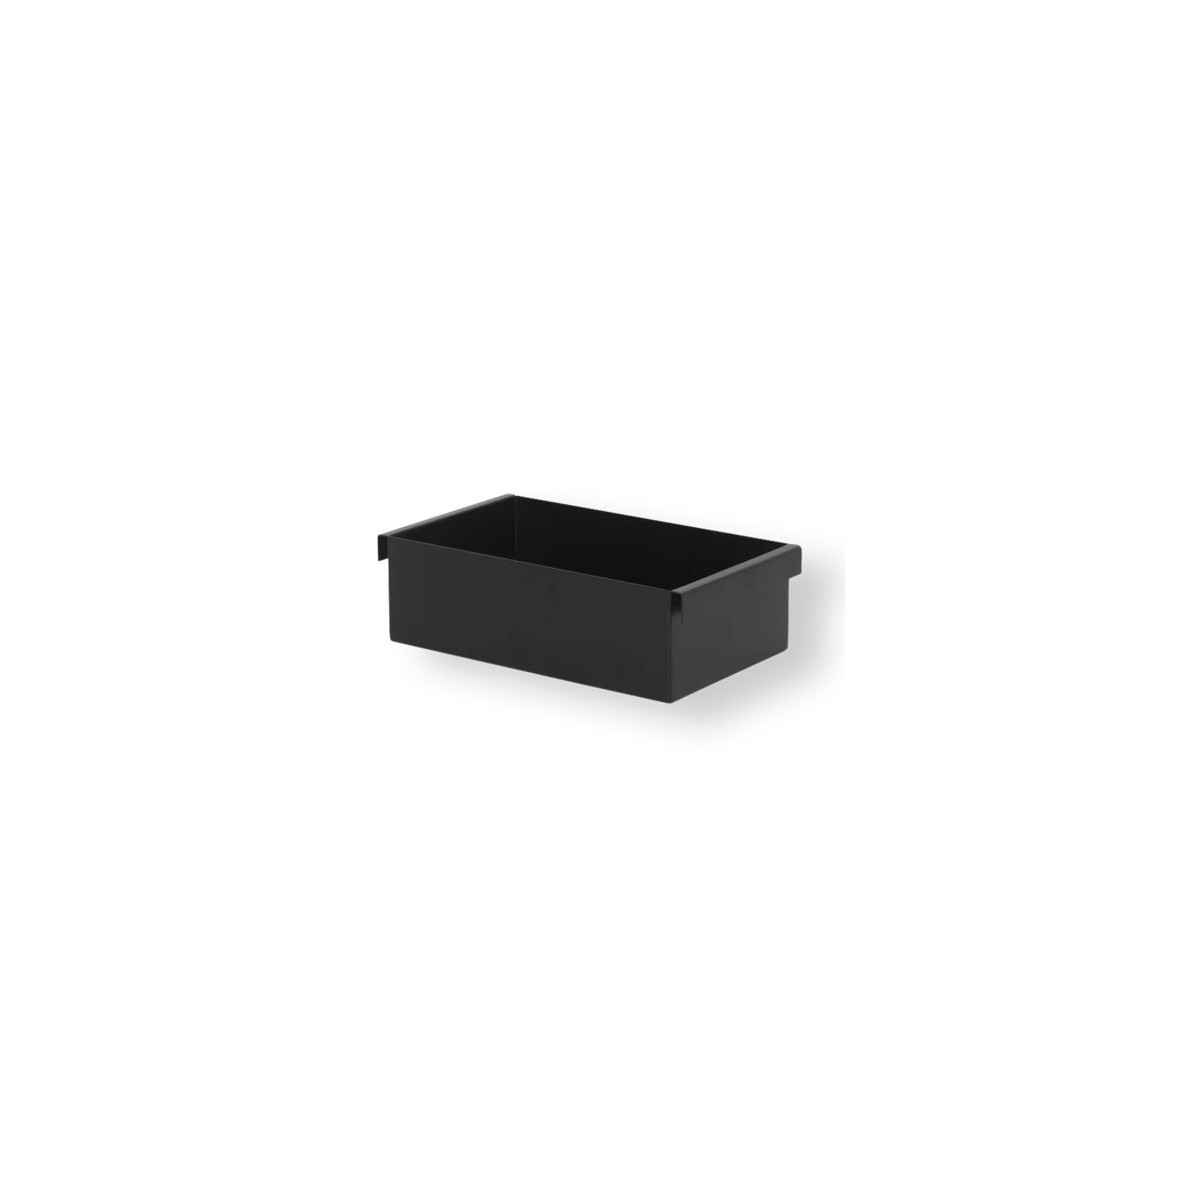 SOLD OUT - container Plant Box black